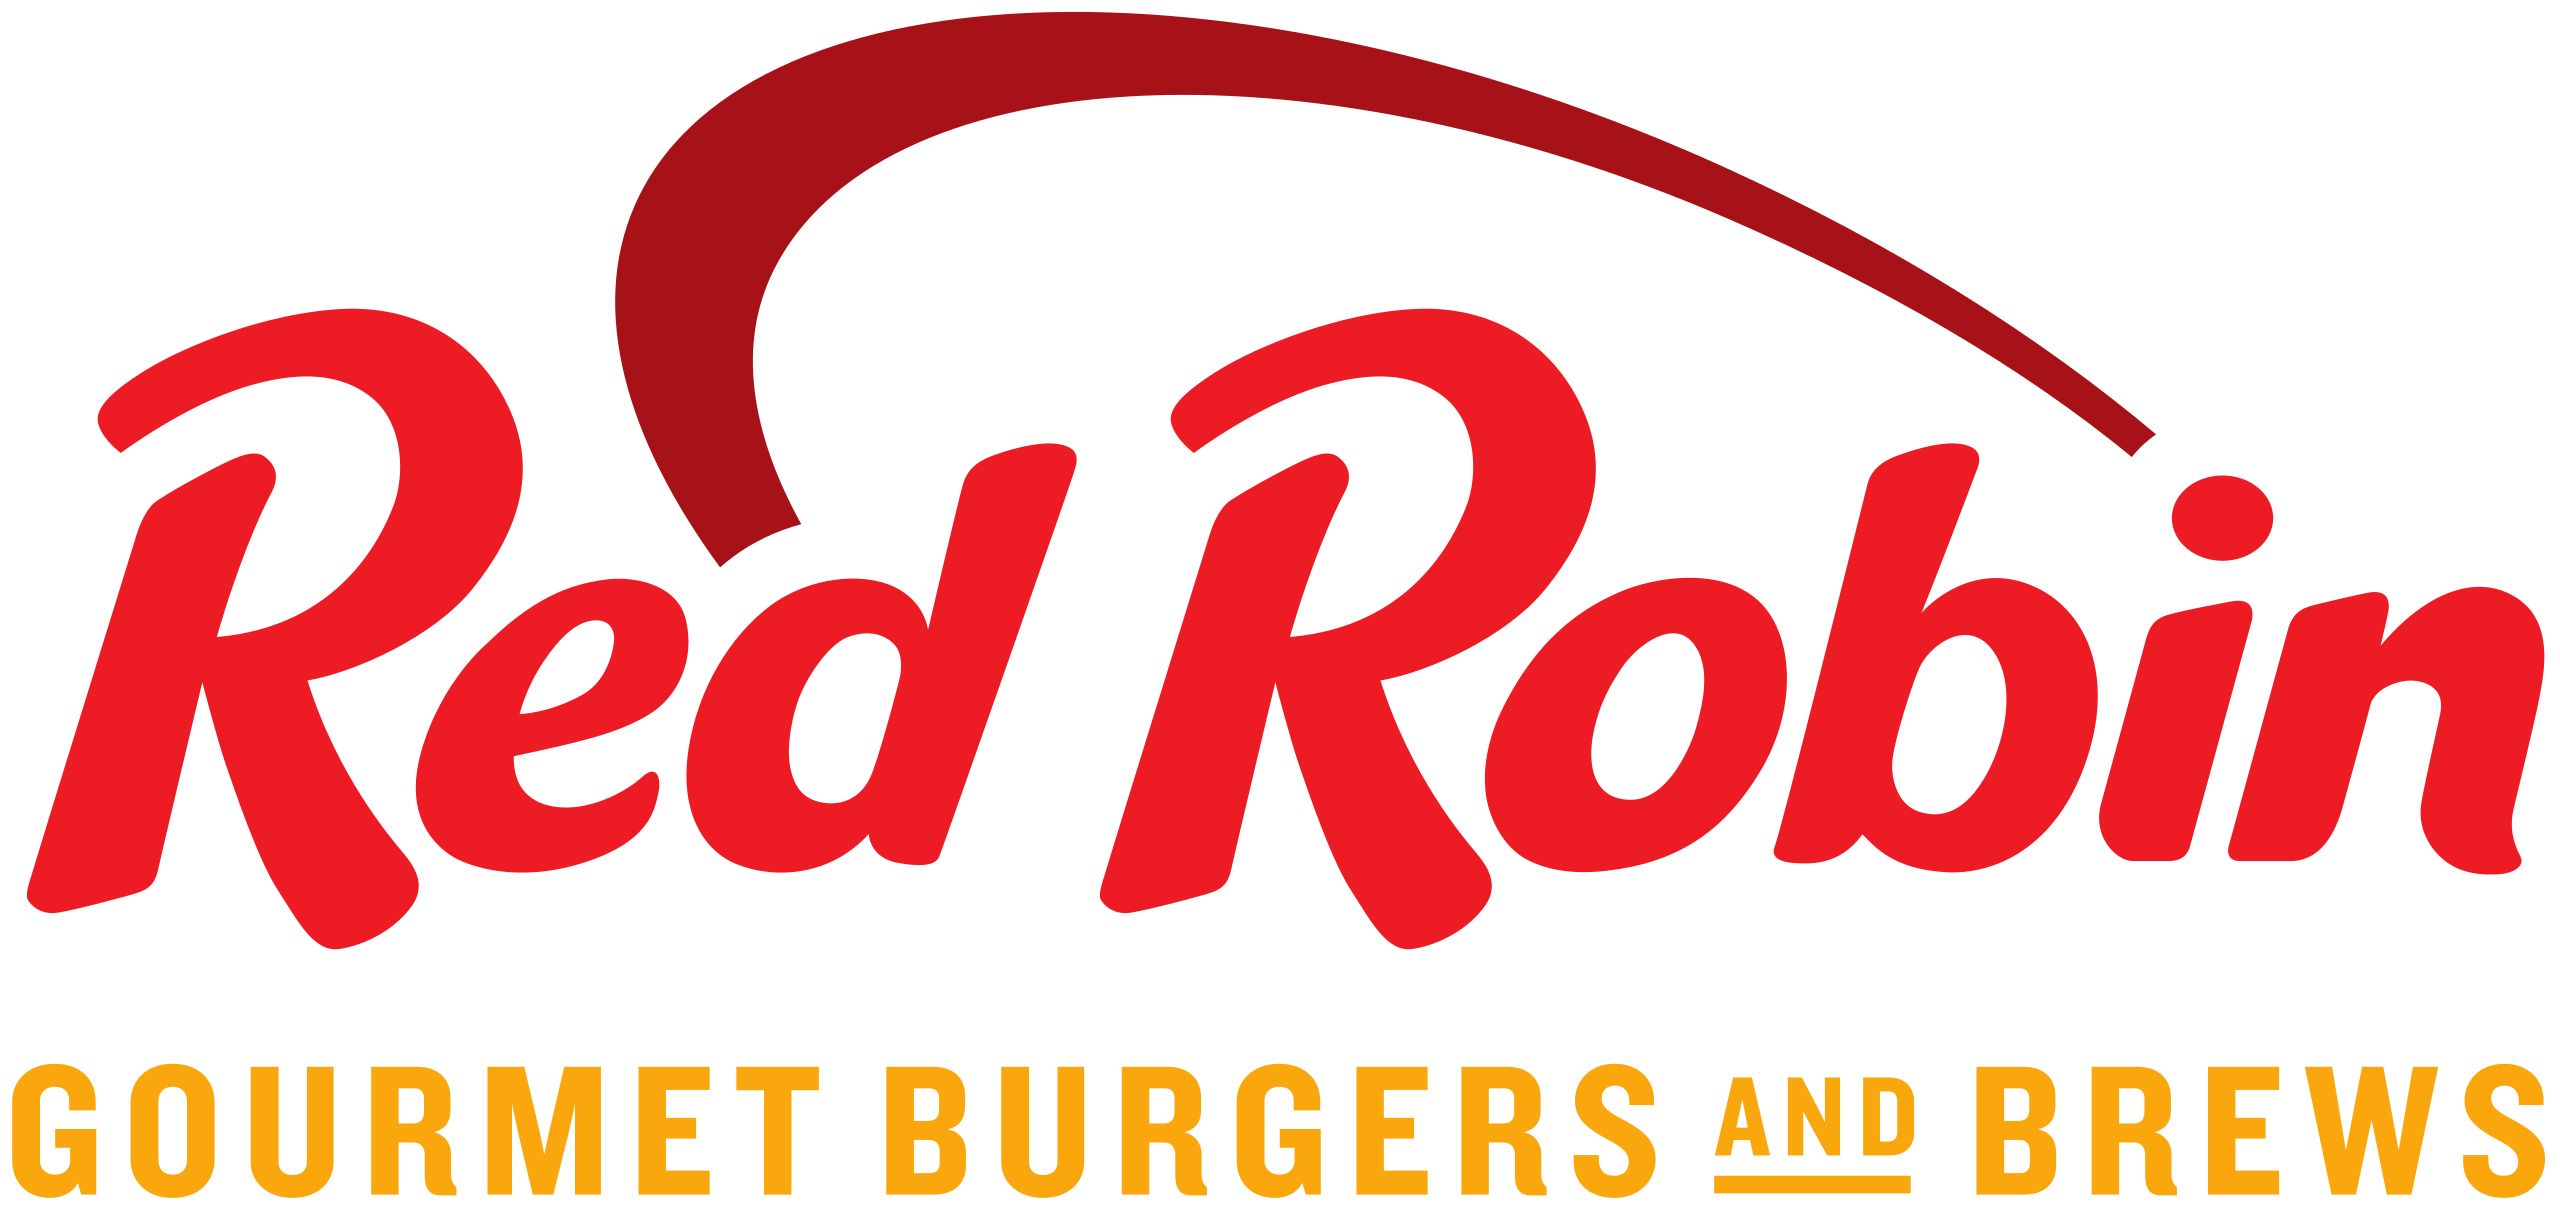 Red Robin | Yummm! Get a free Red's tavern double with free refills of bottomless steak fries.